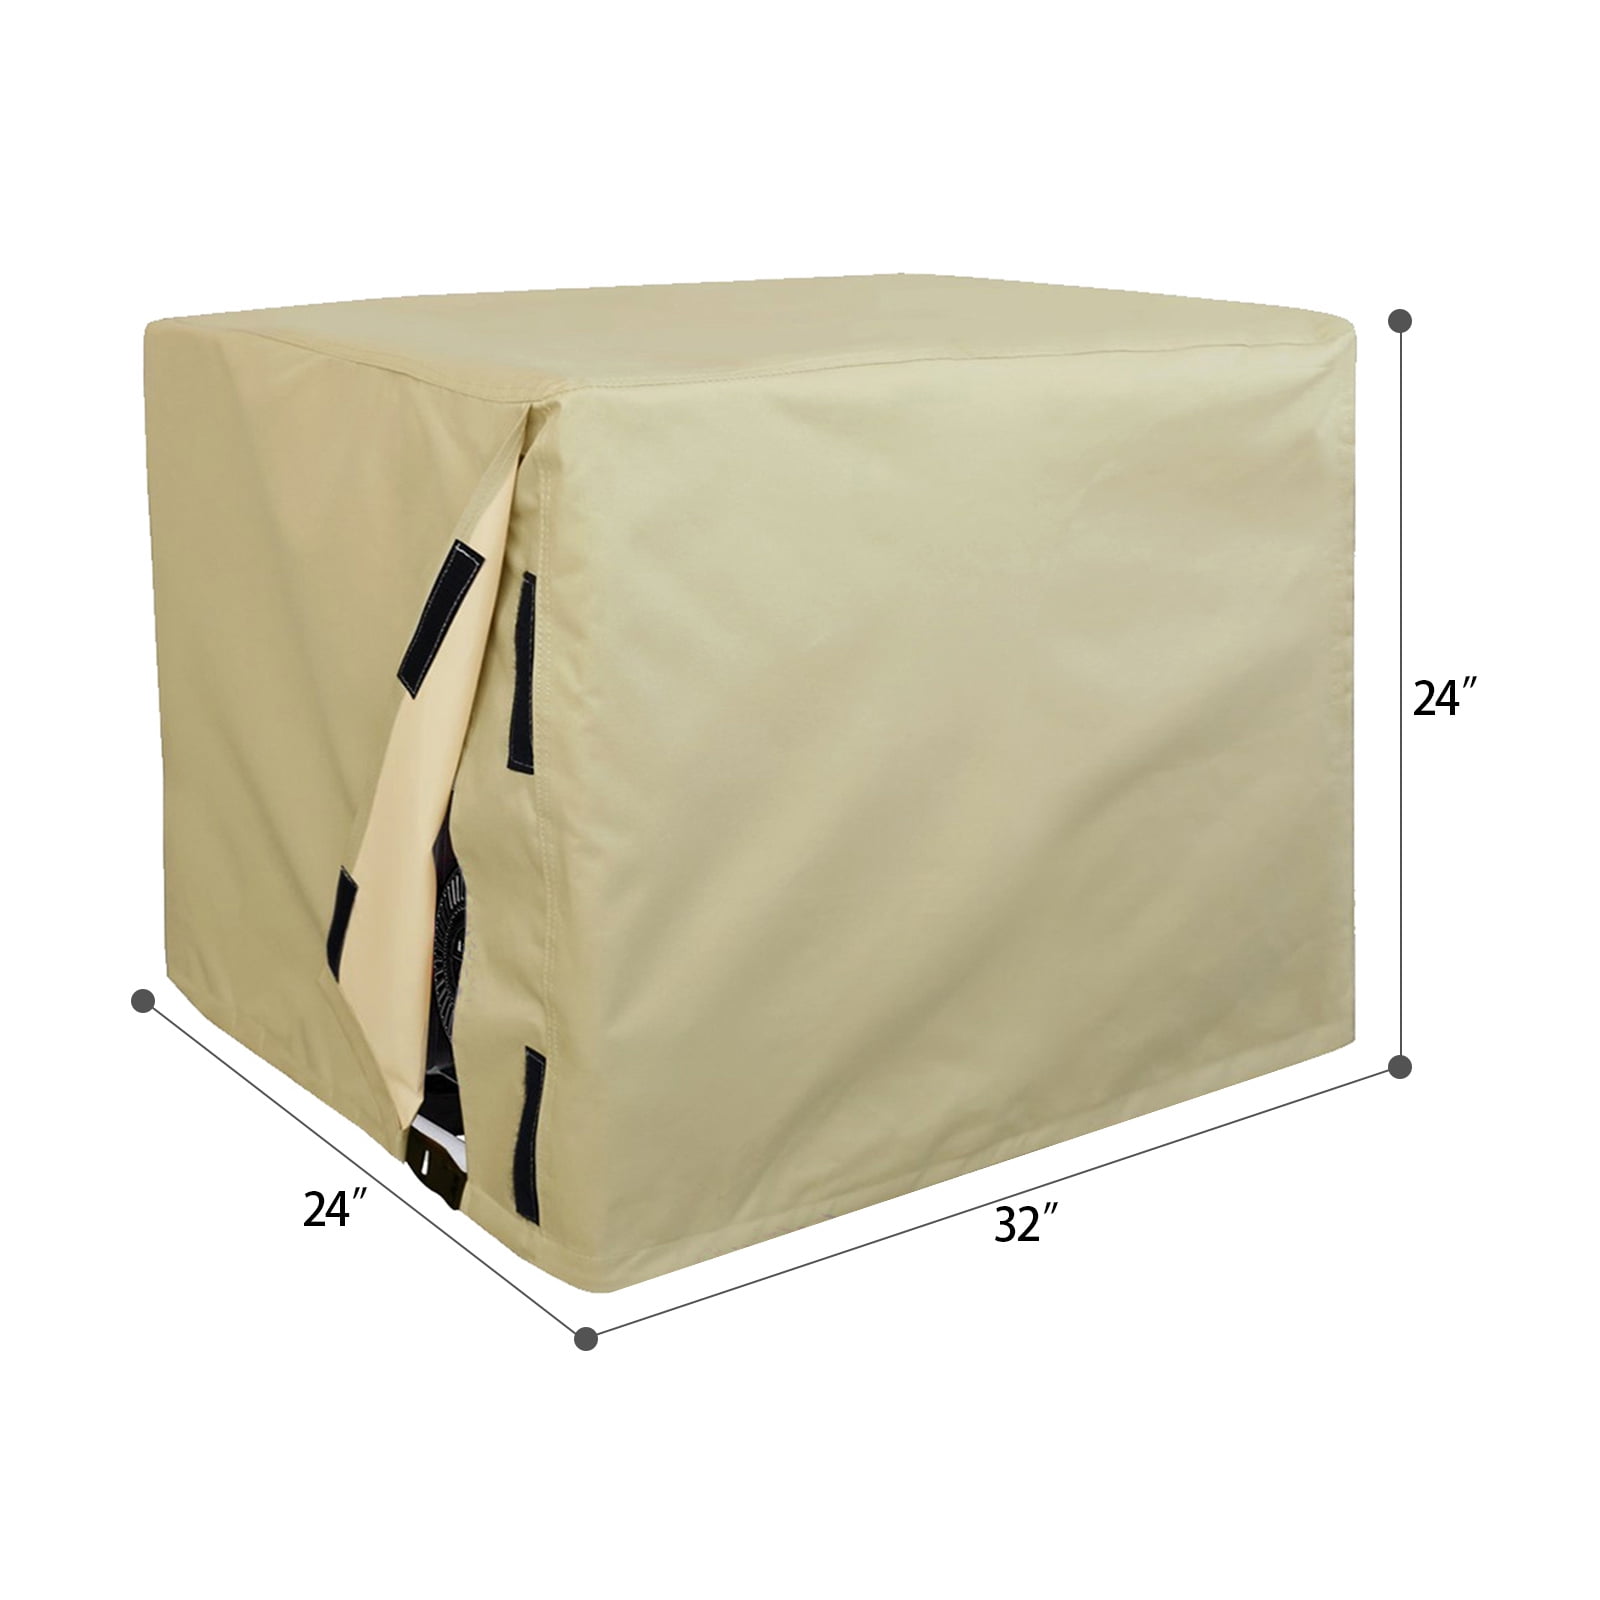 Waterproof Generator Cover Universal Thick 600D Oxford 26"x20"x20" UV Resistant 